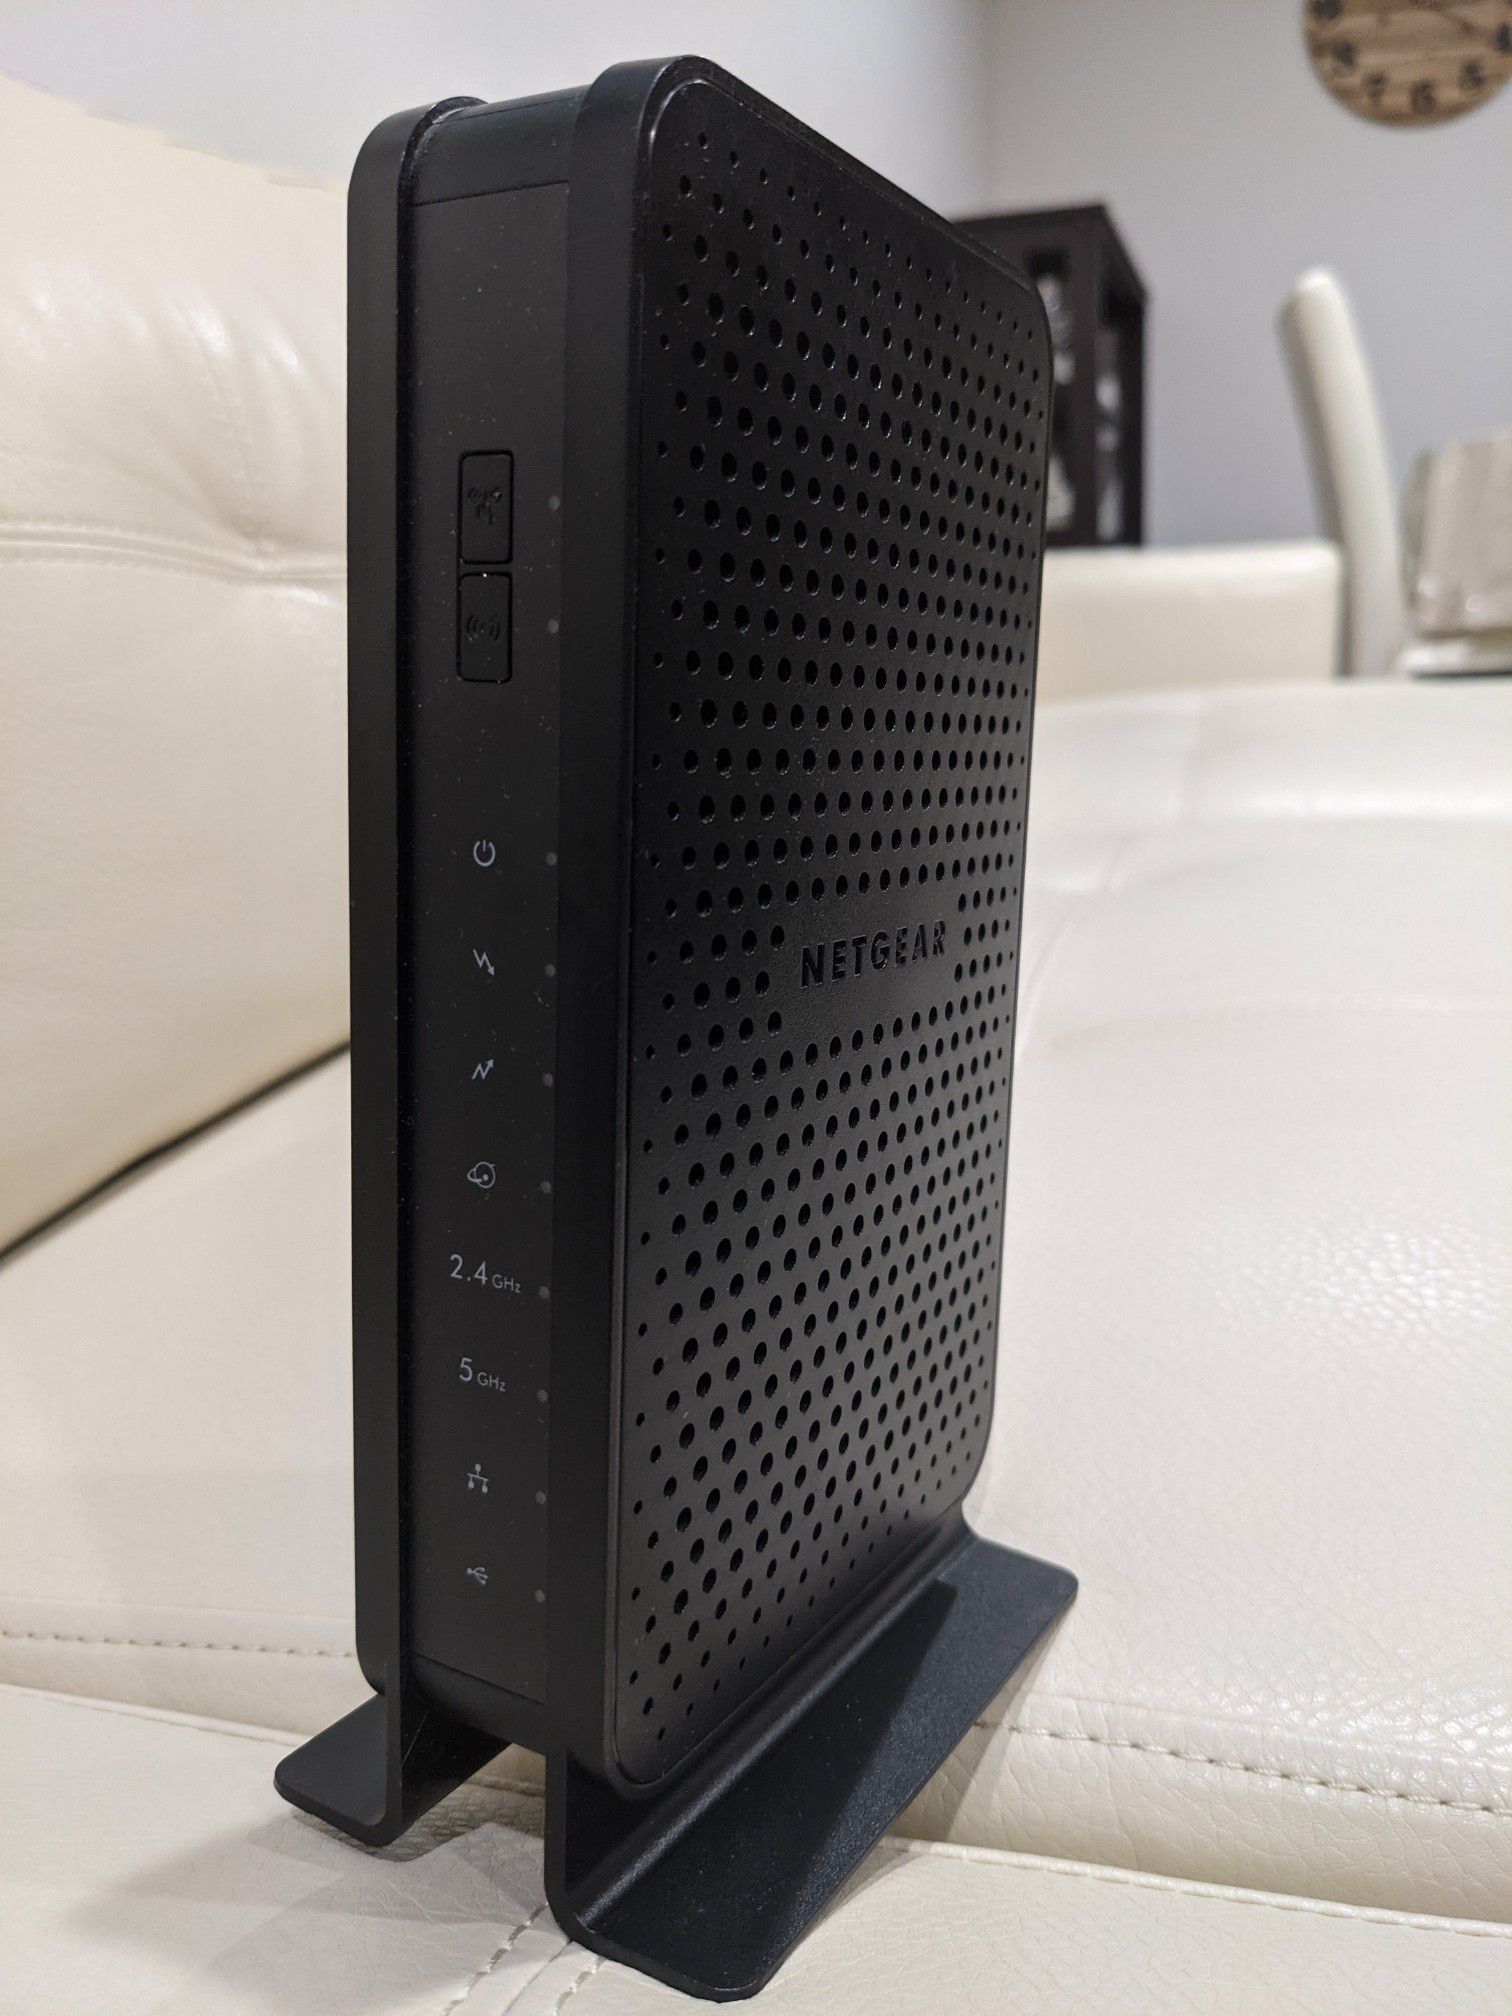 Netgear 2-in1 Wifi router w/out the box